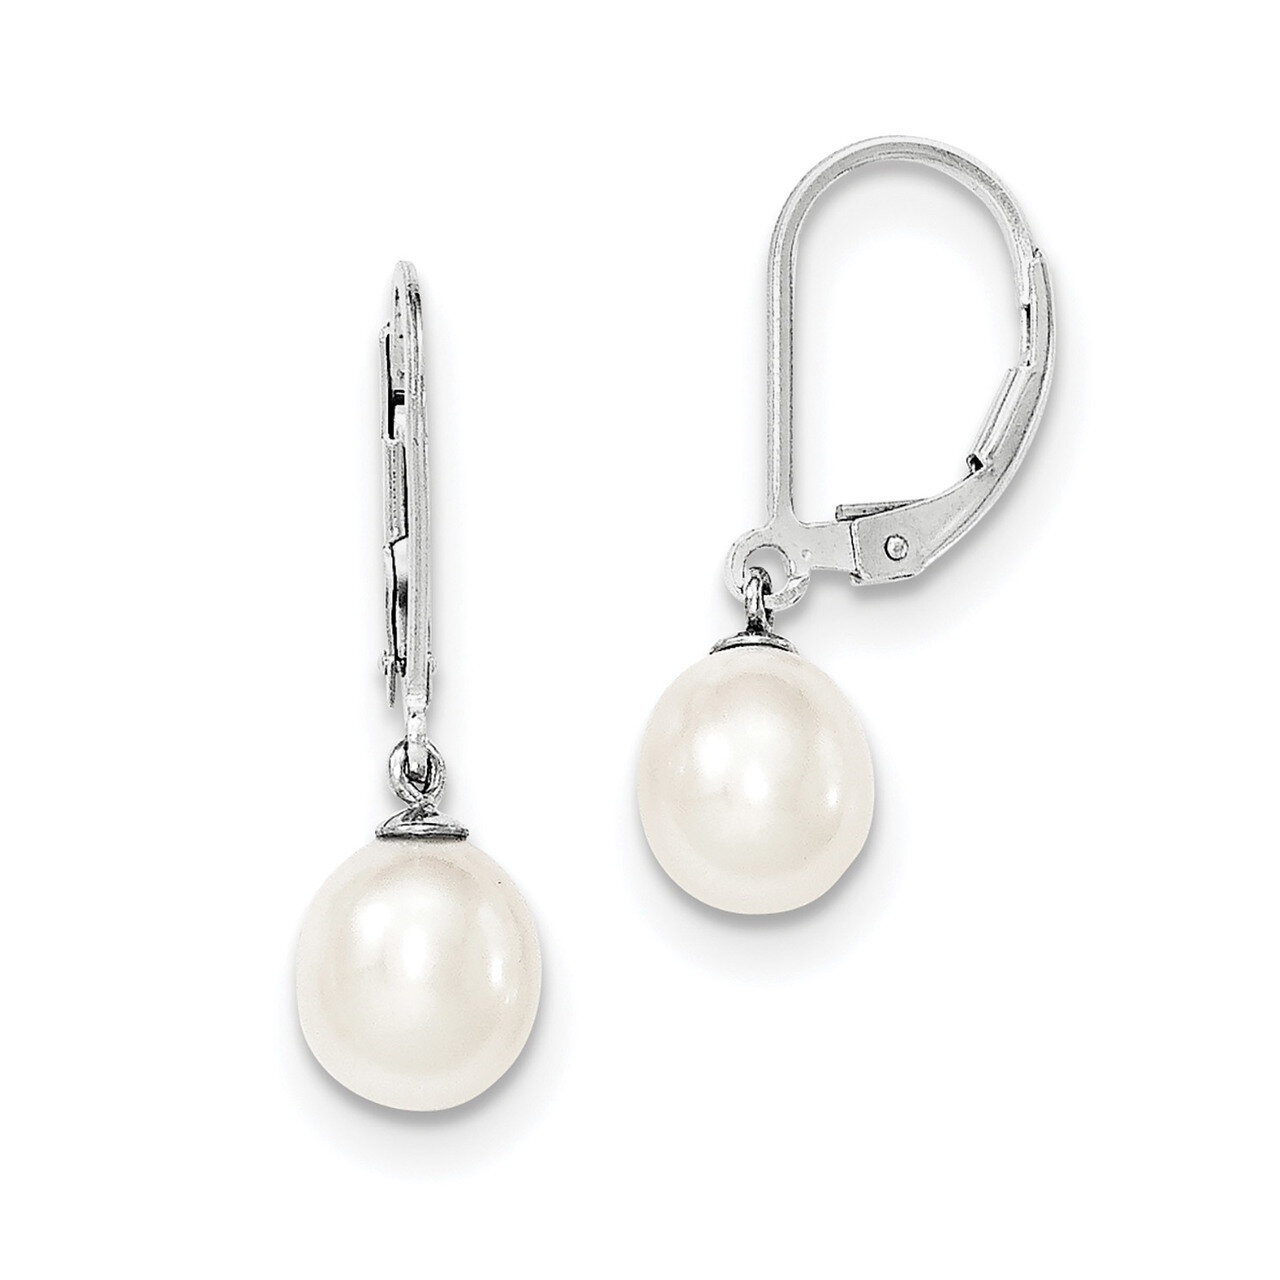 7-8mm White Cultured Freshwater Pearl Leverback Earrings Sterling Silver Rhodium-plated QE12781